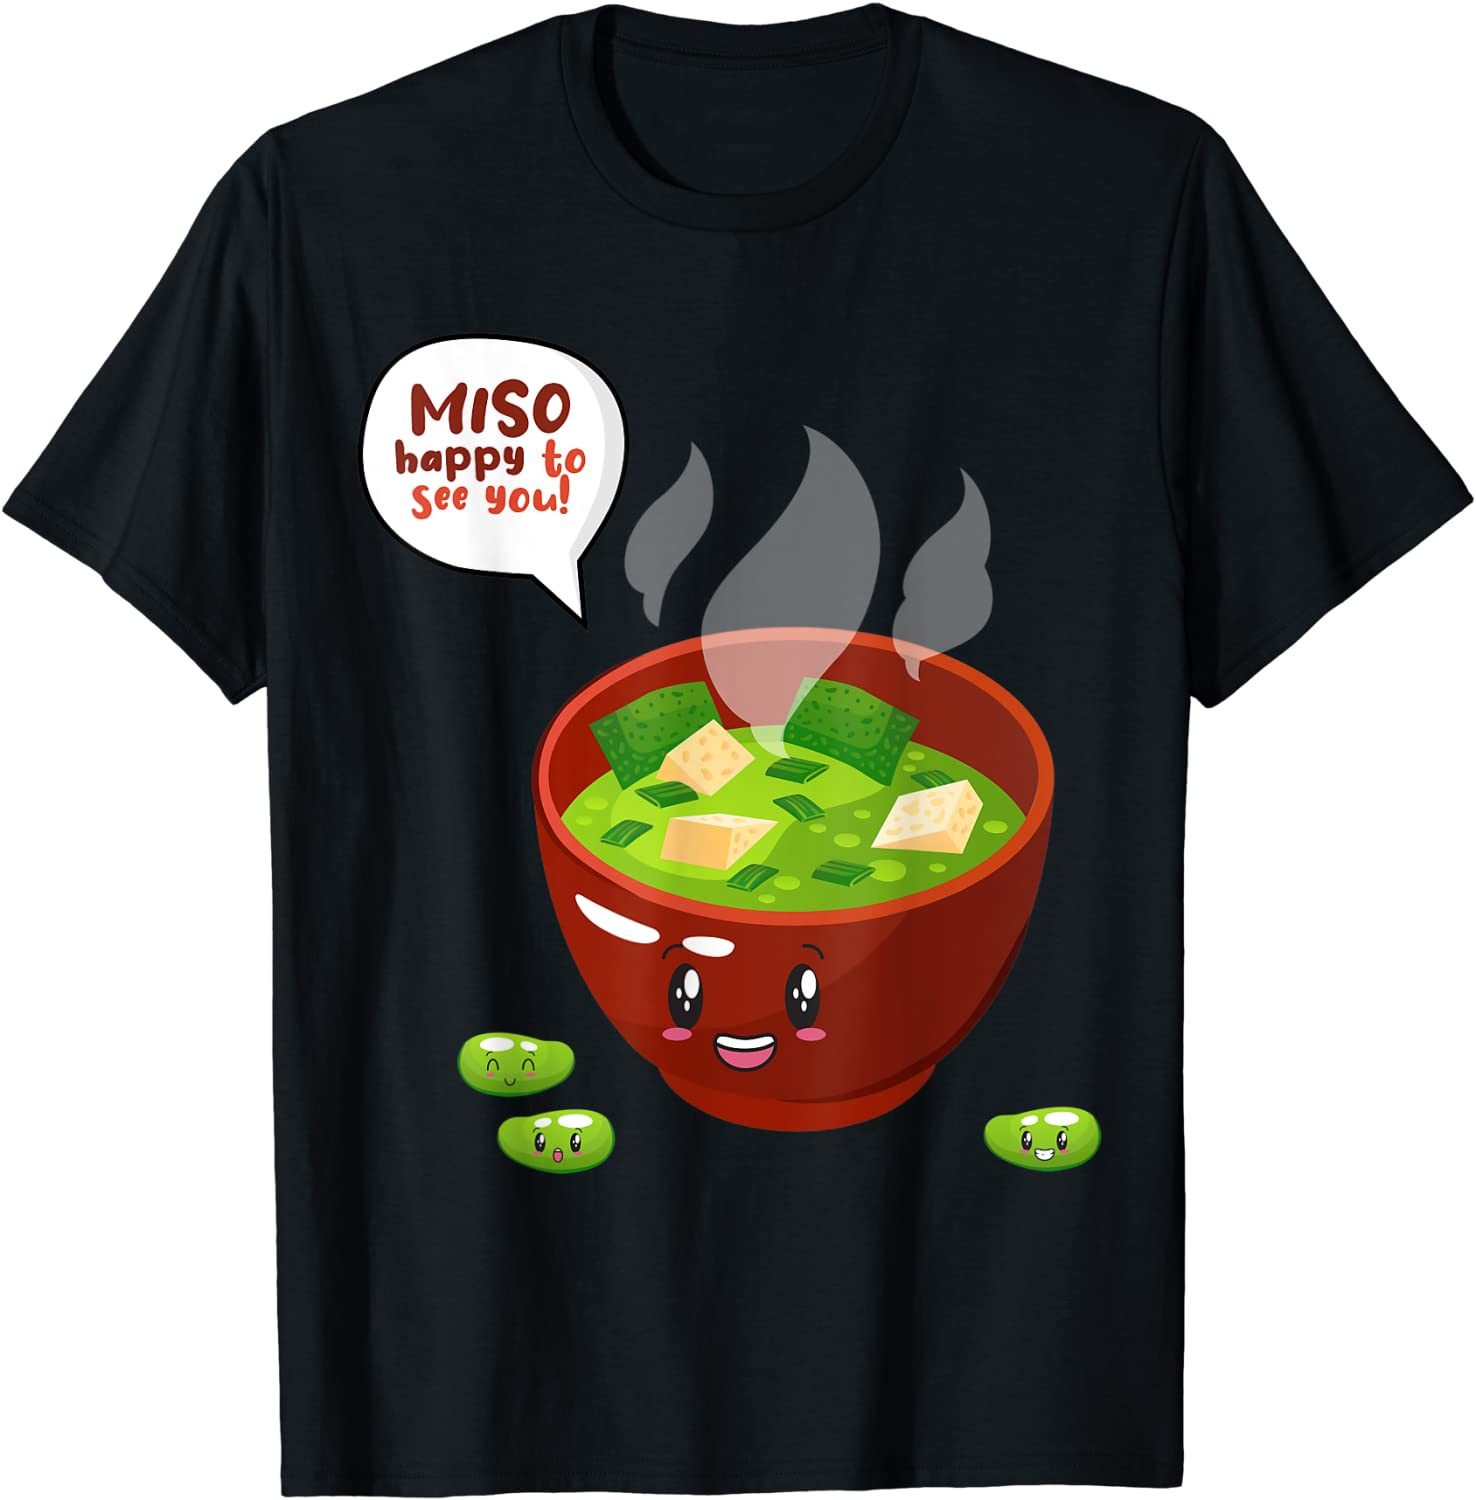 Cute Japanese Tofu Miso Happy To See You Valentine's Day Pun T-Shirt